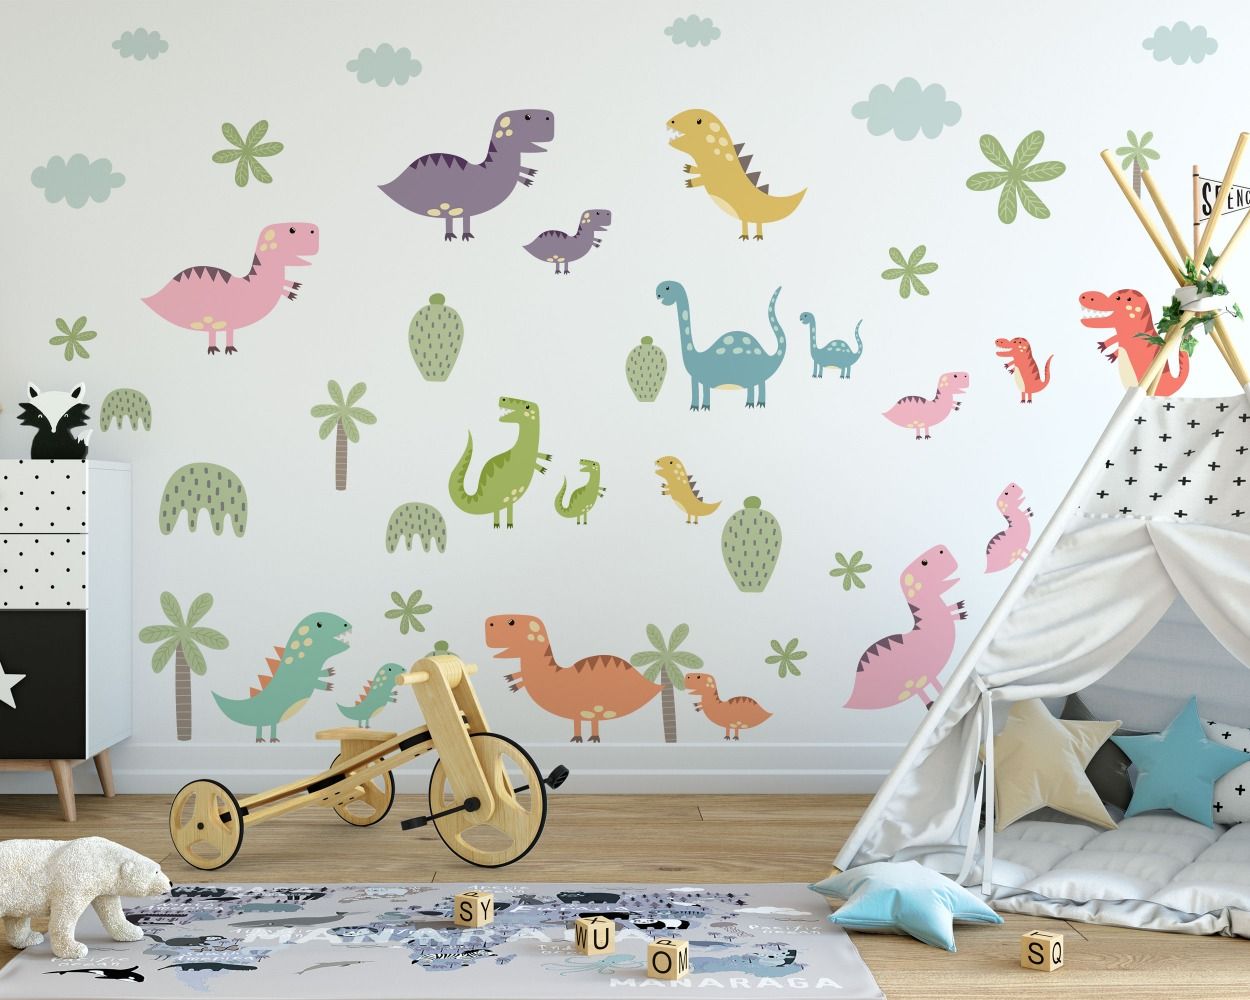 Dinosaurs, Jurassic park Theme Watercolor Wall Decals for Nursery Wall Decor